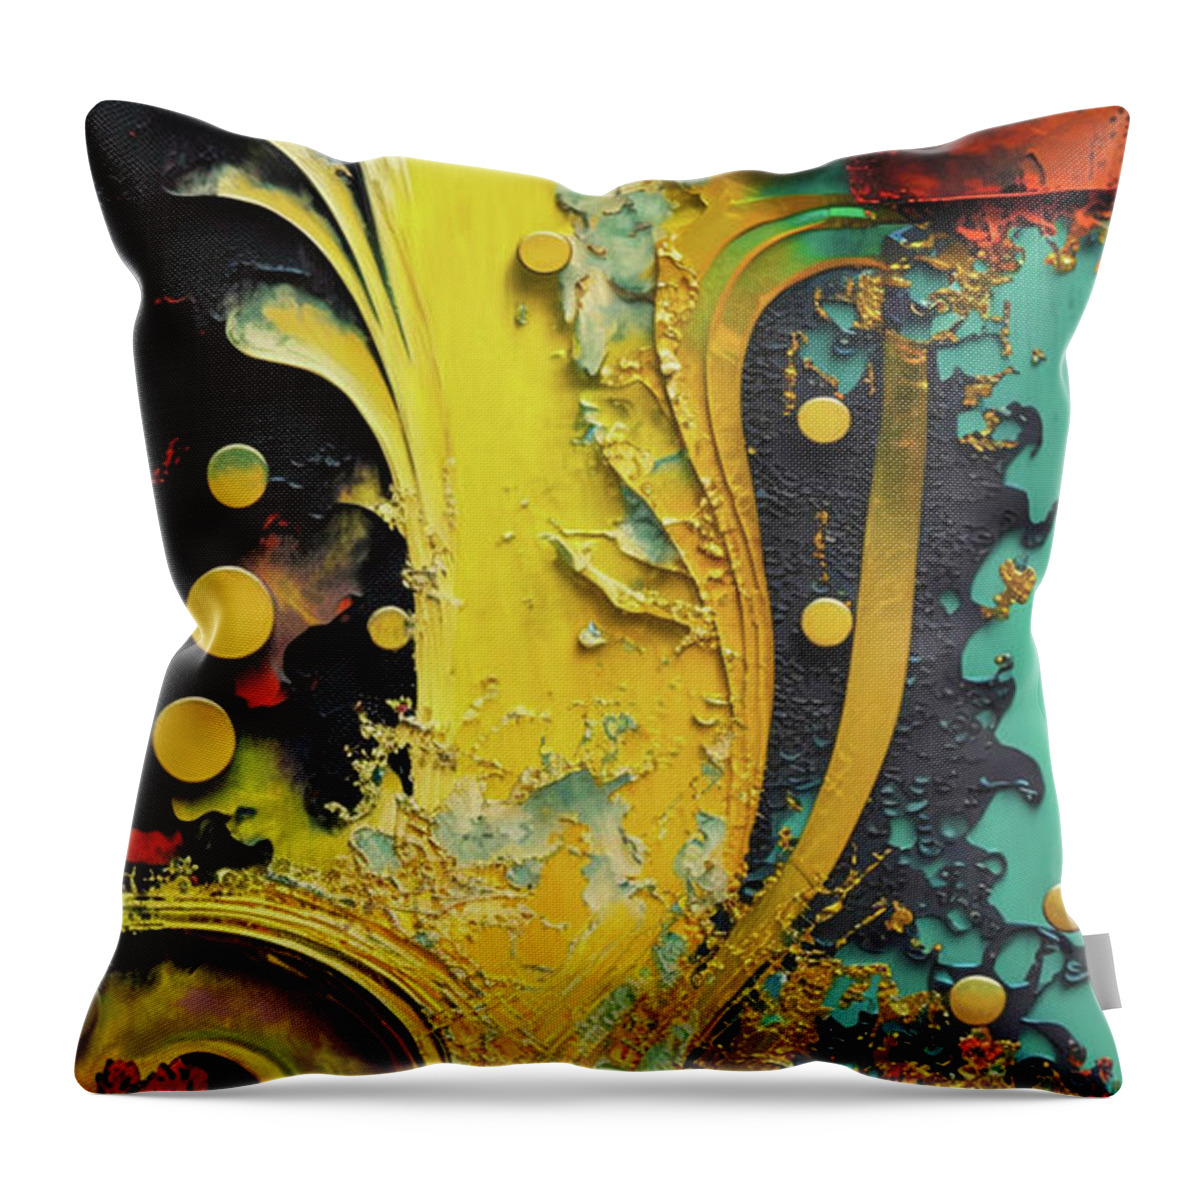 Torn Throw Pillow featuring the mixed media Celestrial Celebration by Glenn Robins